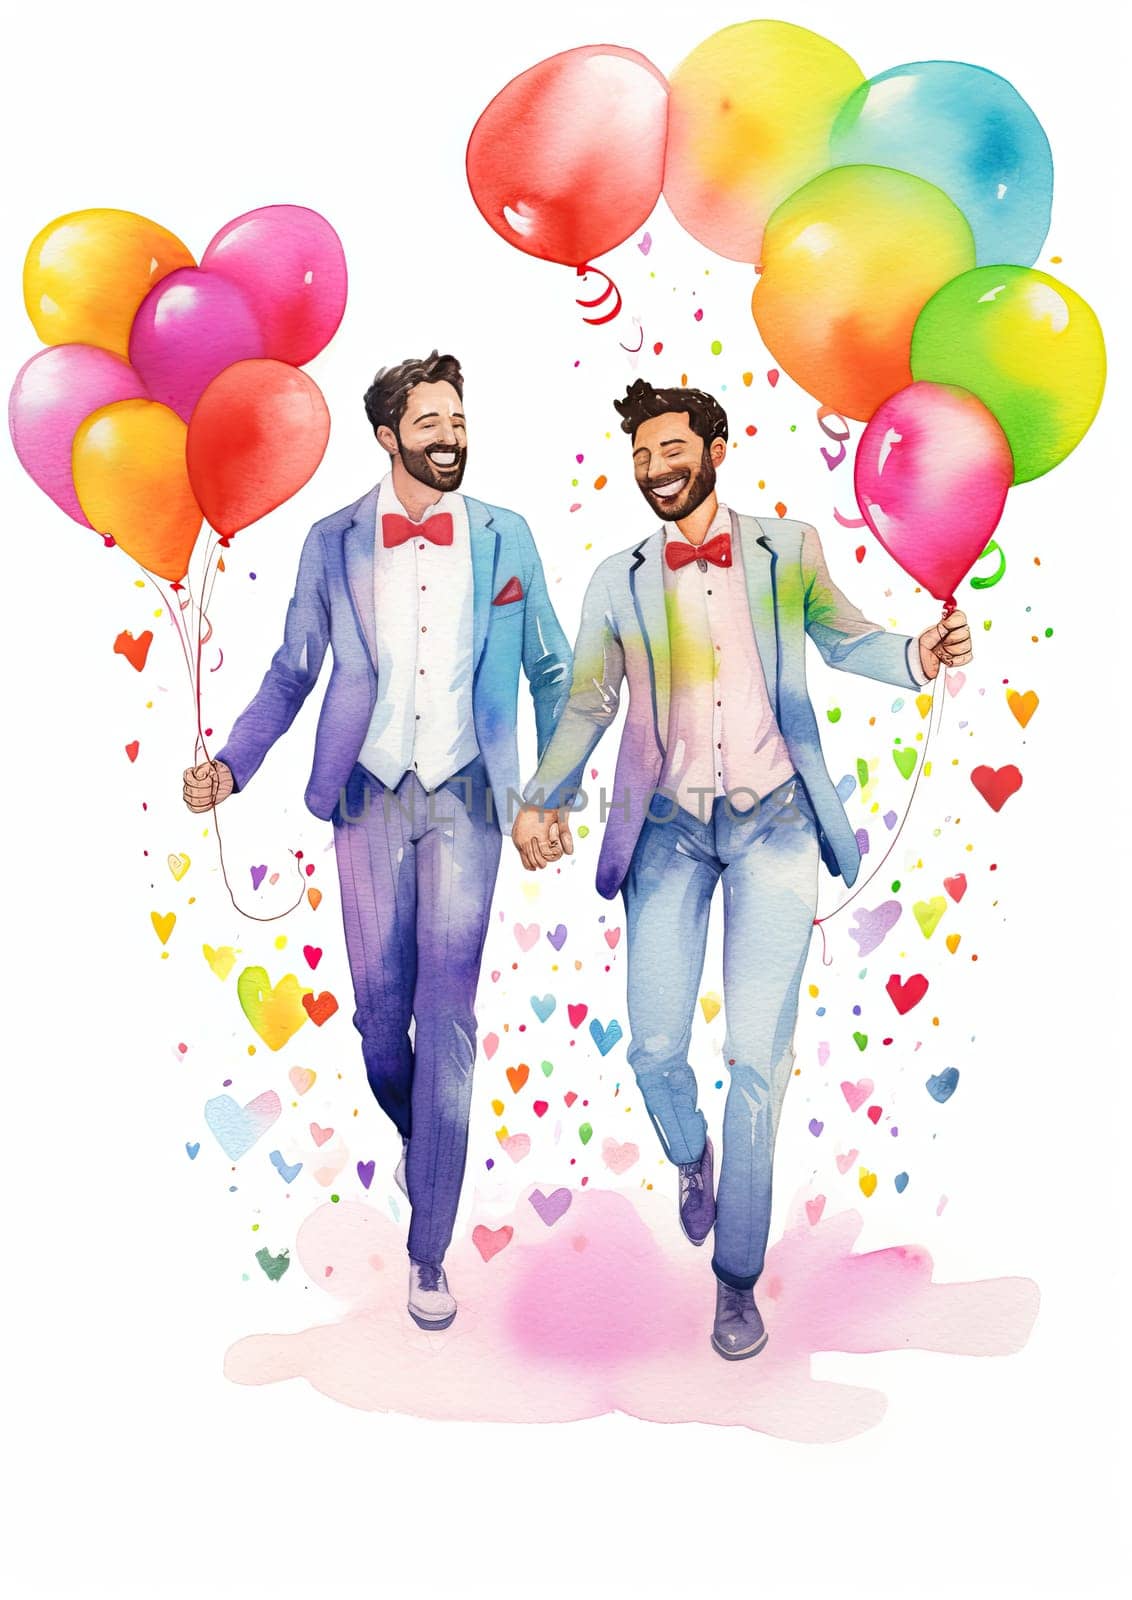 Illustration of two gay men holding hands and smiling with colorful balloons isolated on white background.